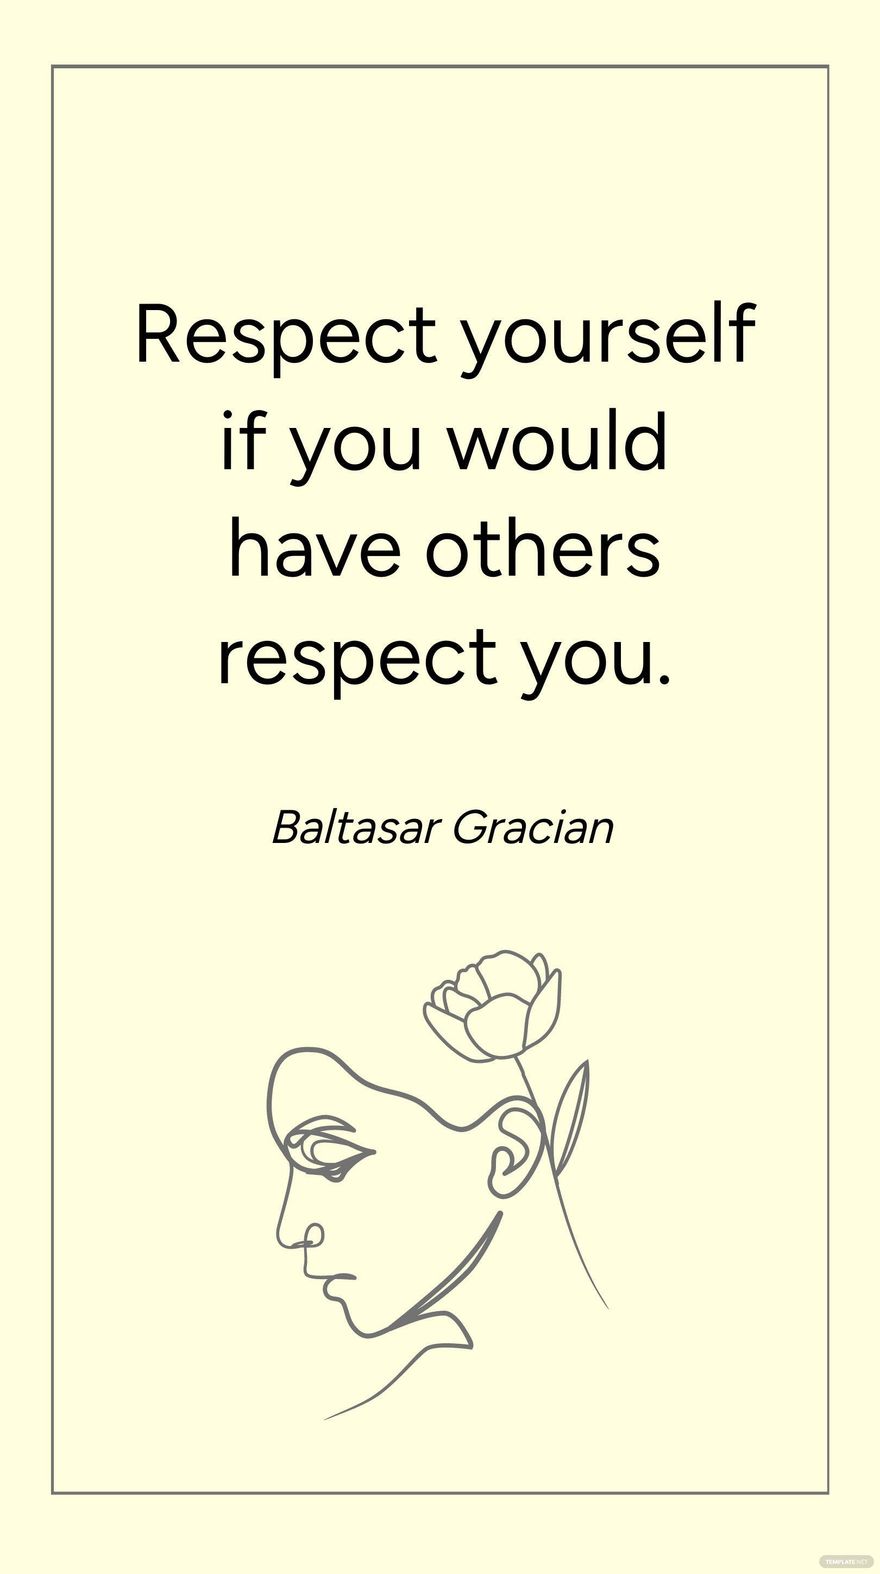 Baltasar Gracian - Respect yourself if you would have others respect you.